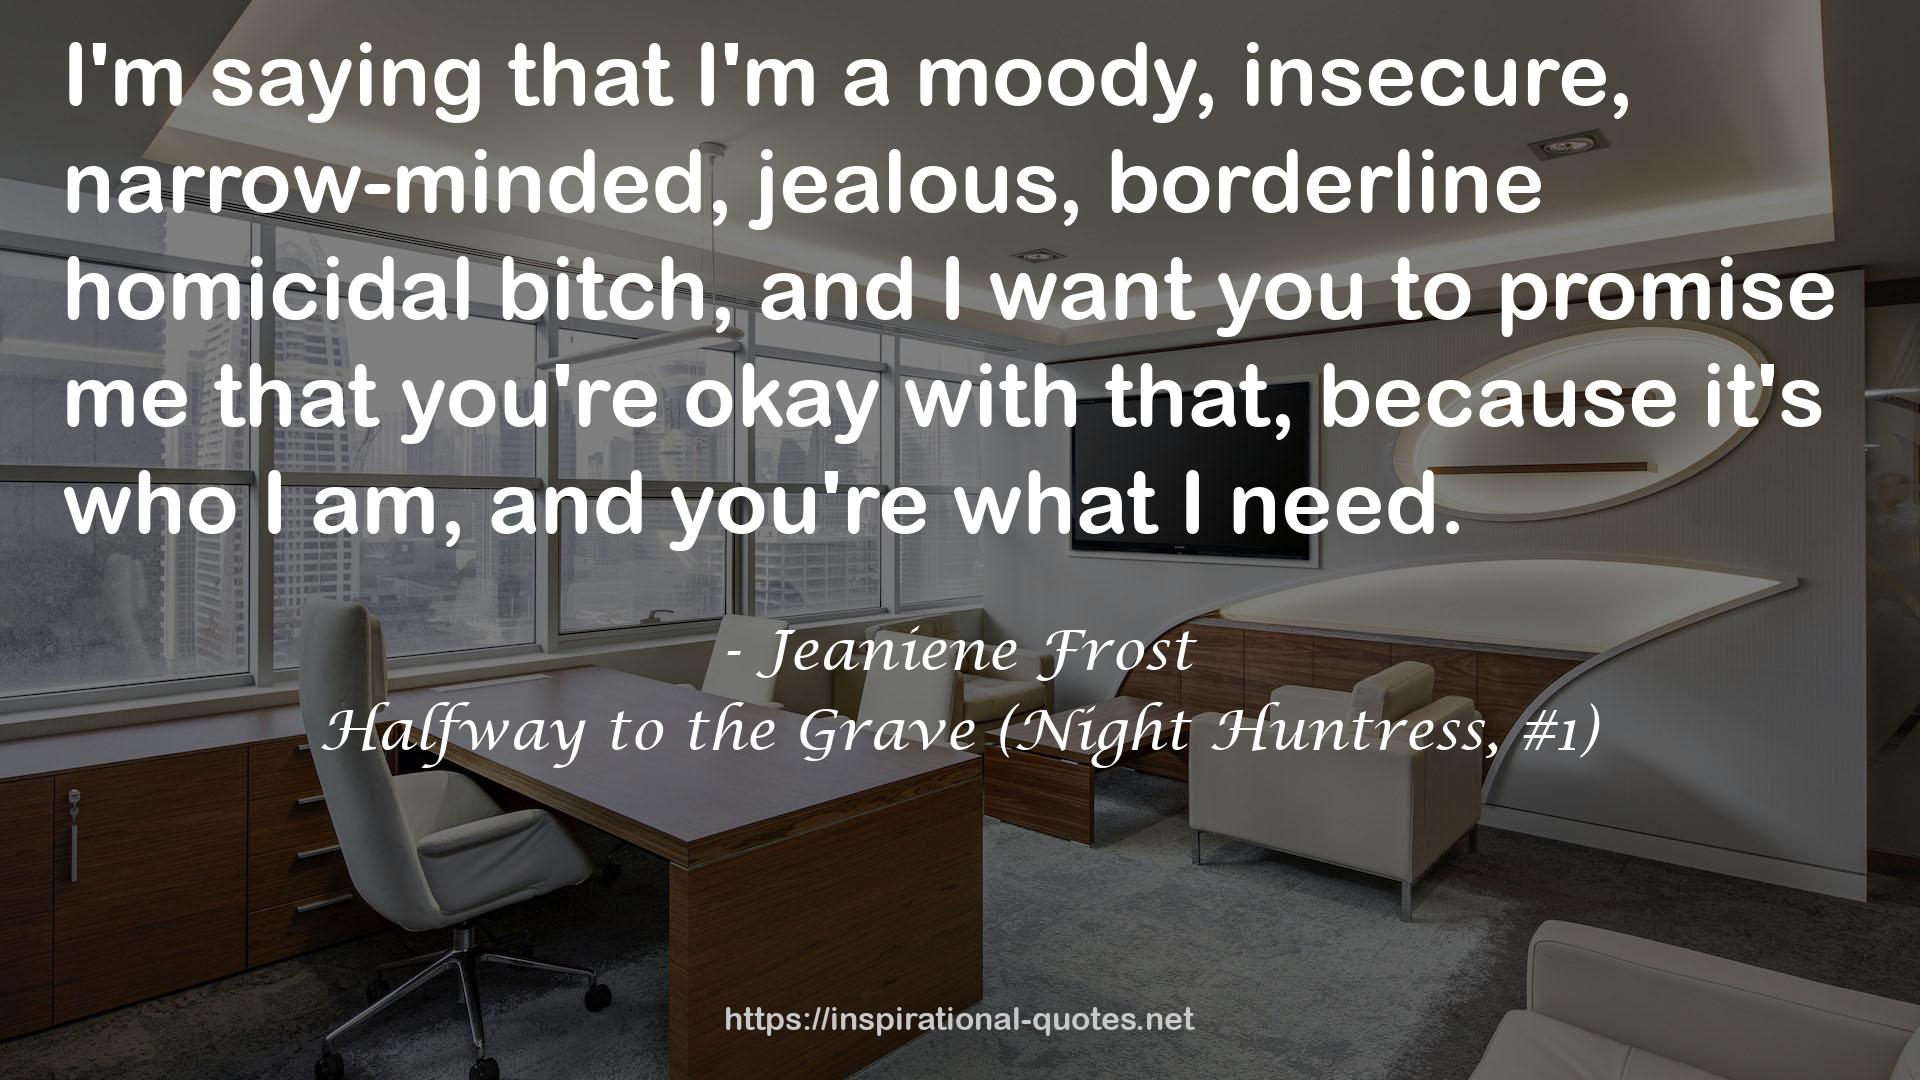 Jeaniene Frost QUOTES